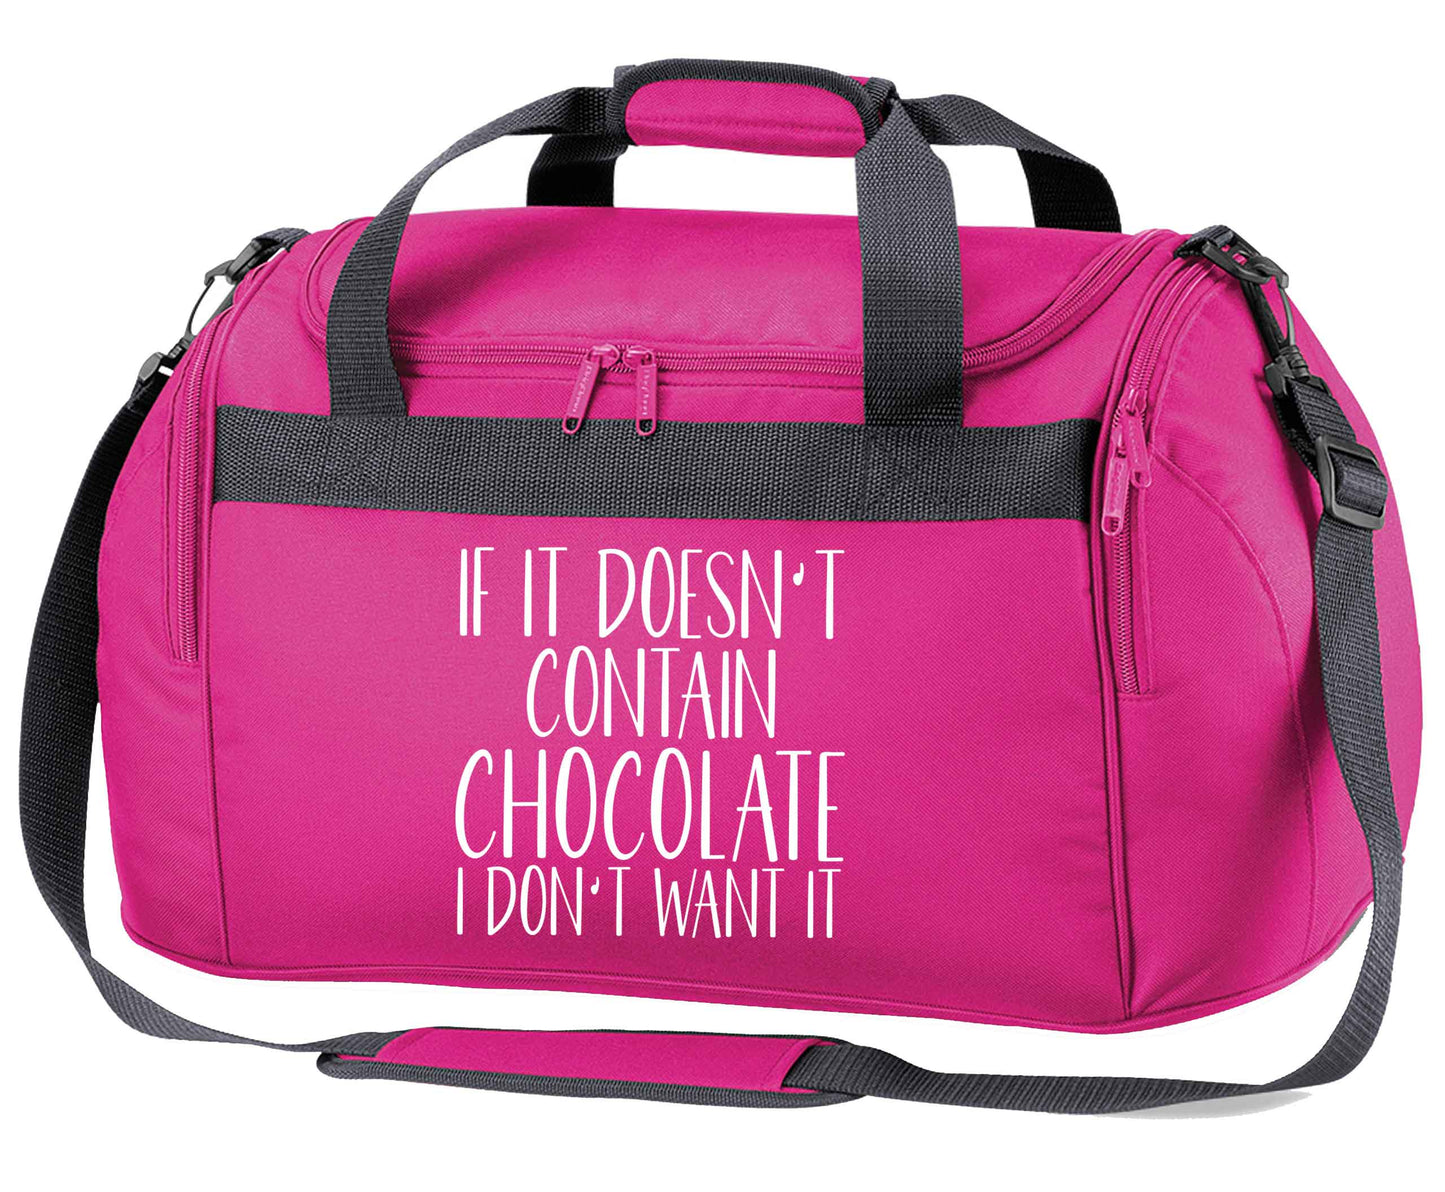 If it doesn't contain chocolate I don't want it pink holdall / duffel bag